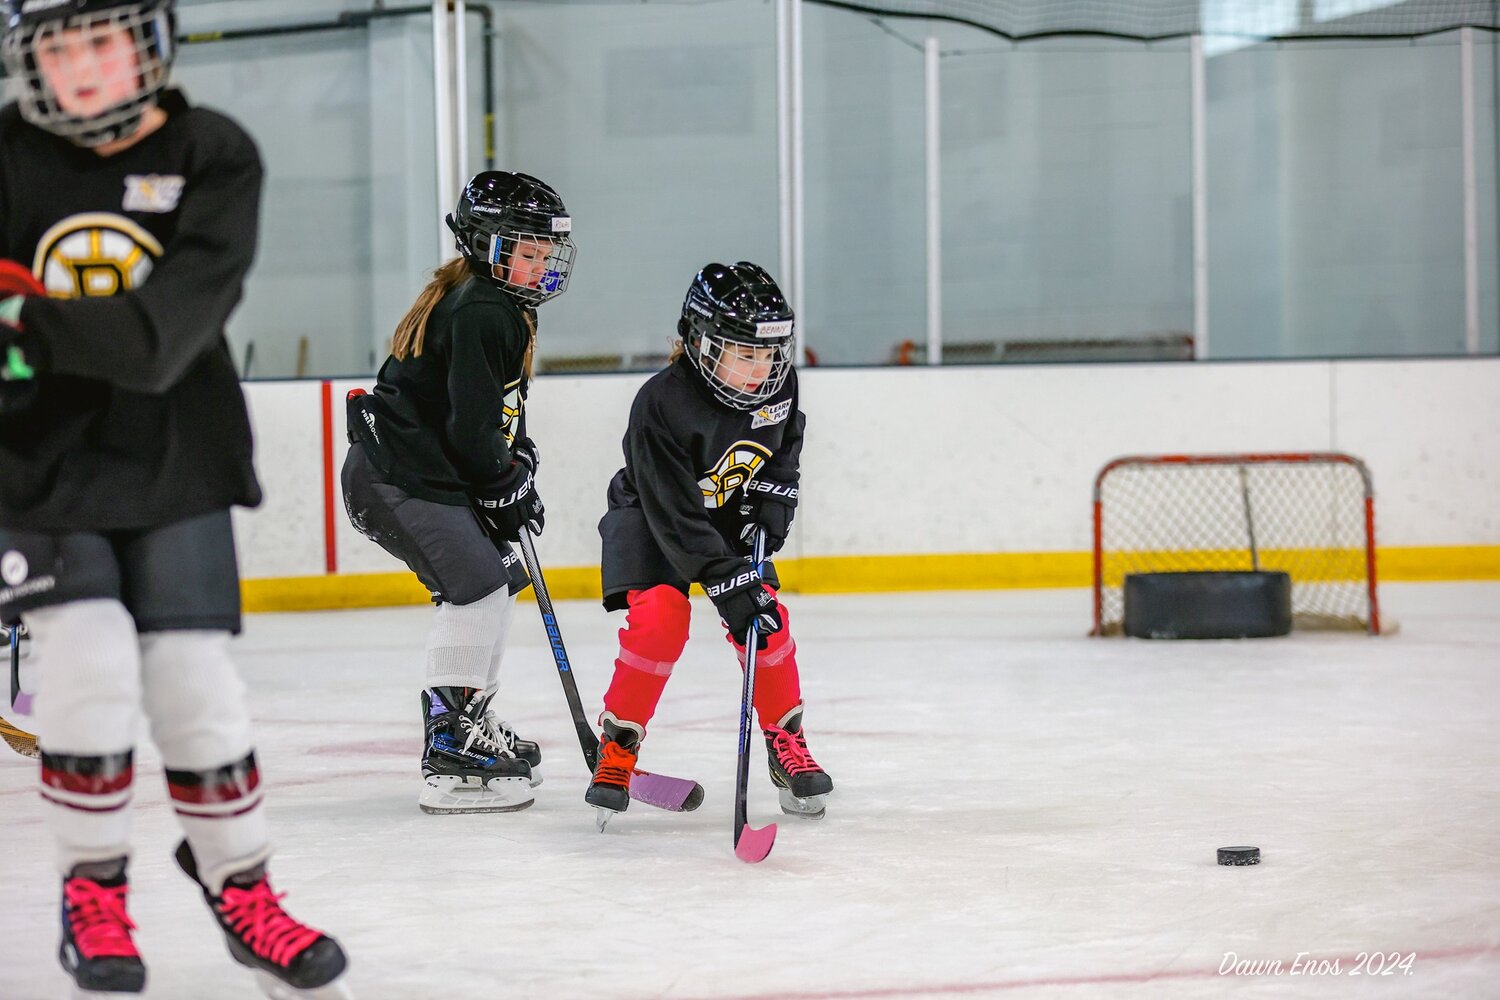 Benny Mangini from Manchester takes to the ice at the O’Maley School in Gloucester last week.